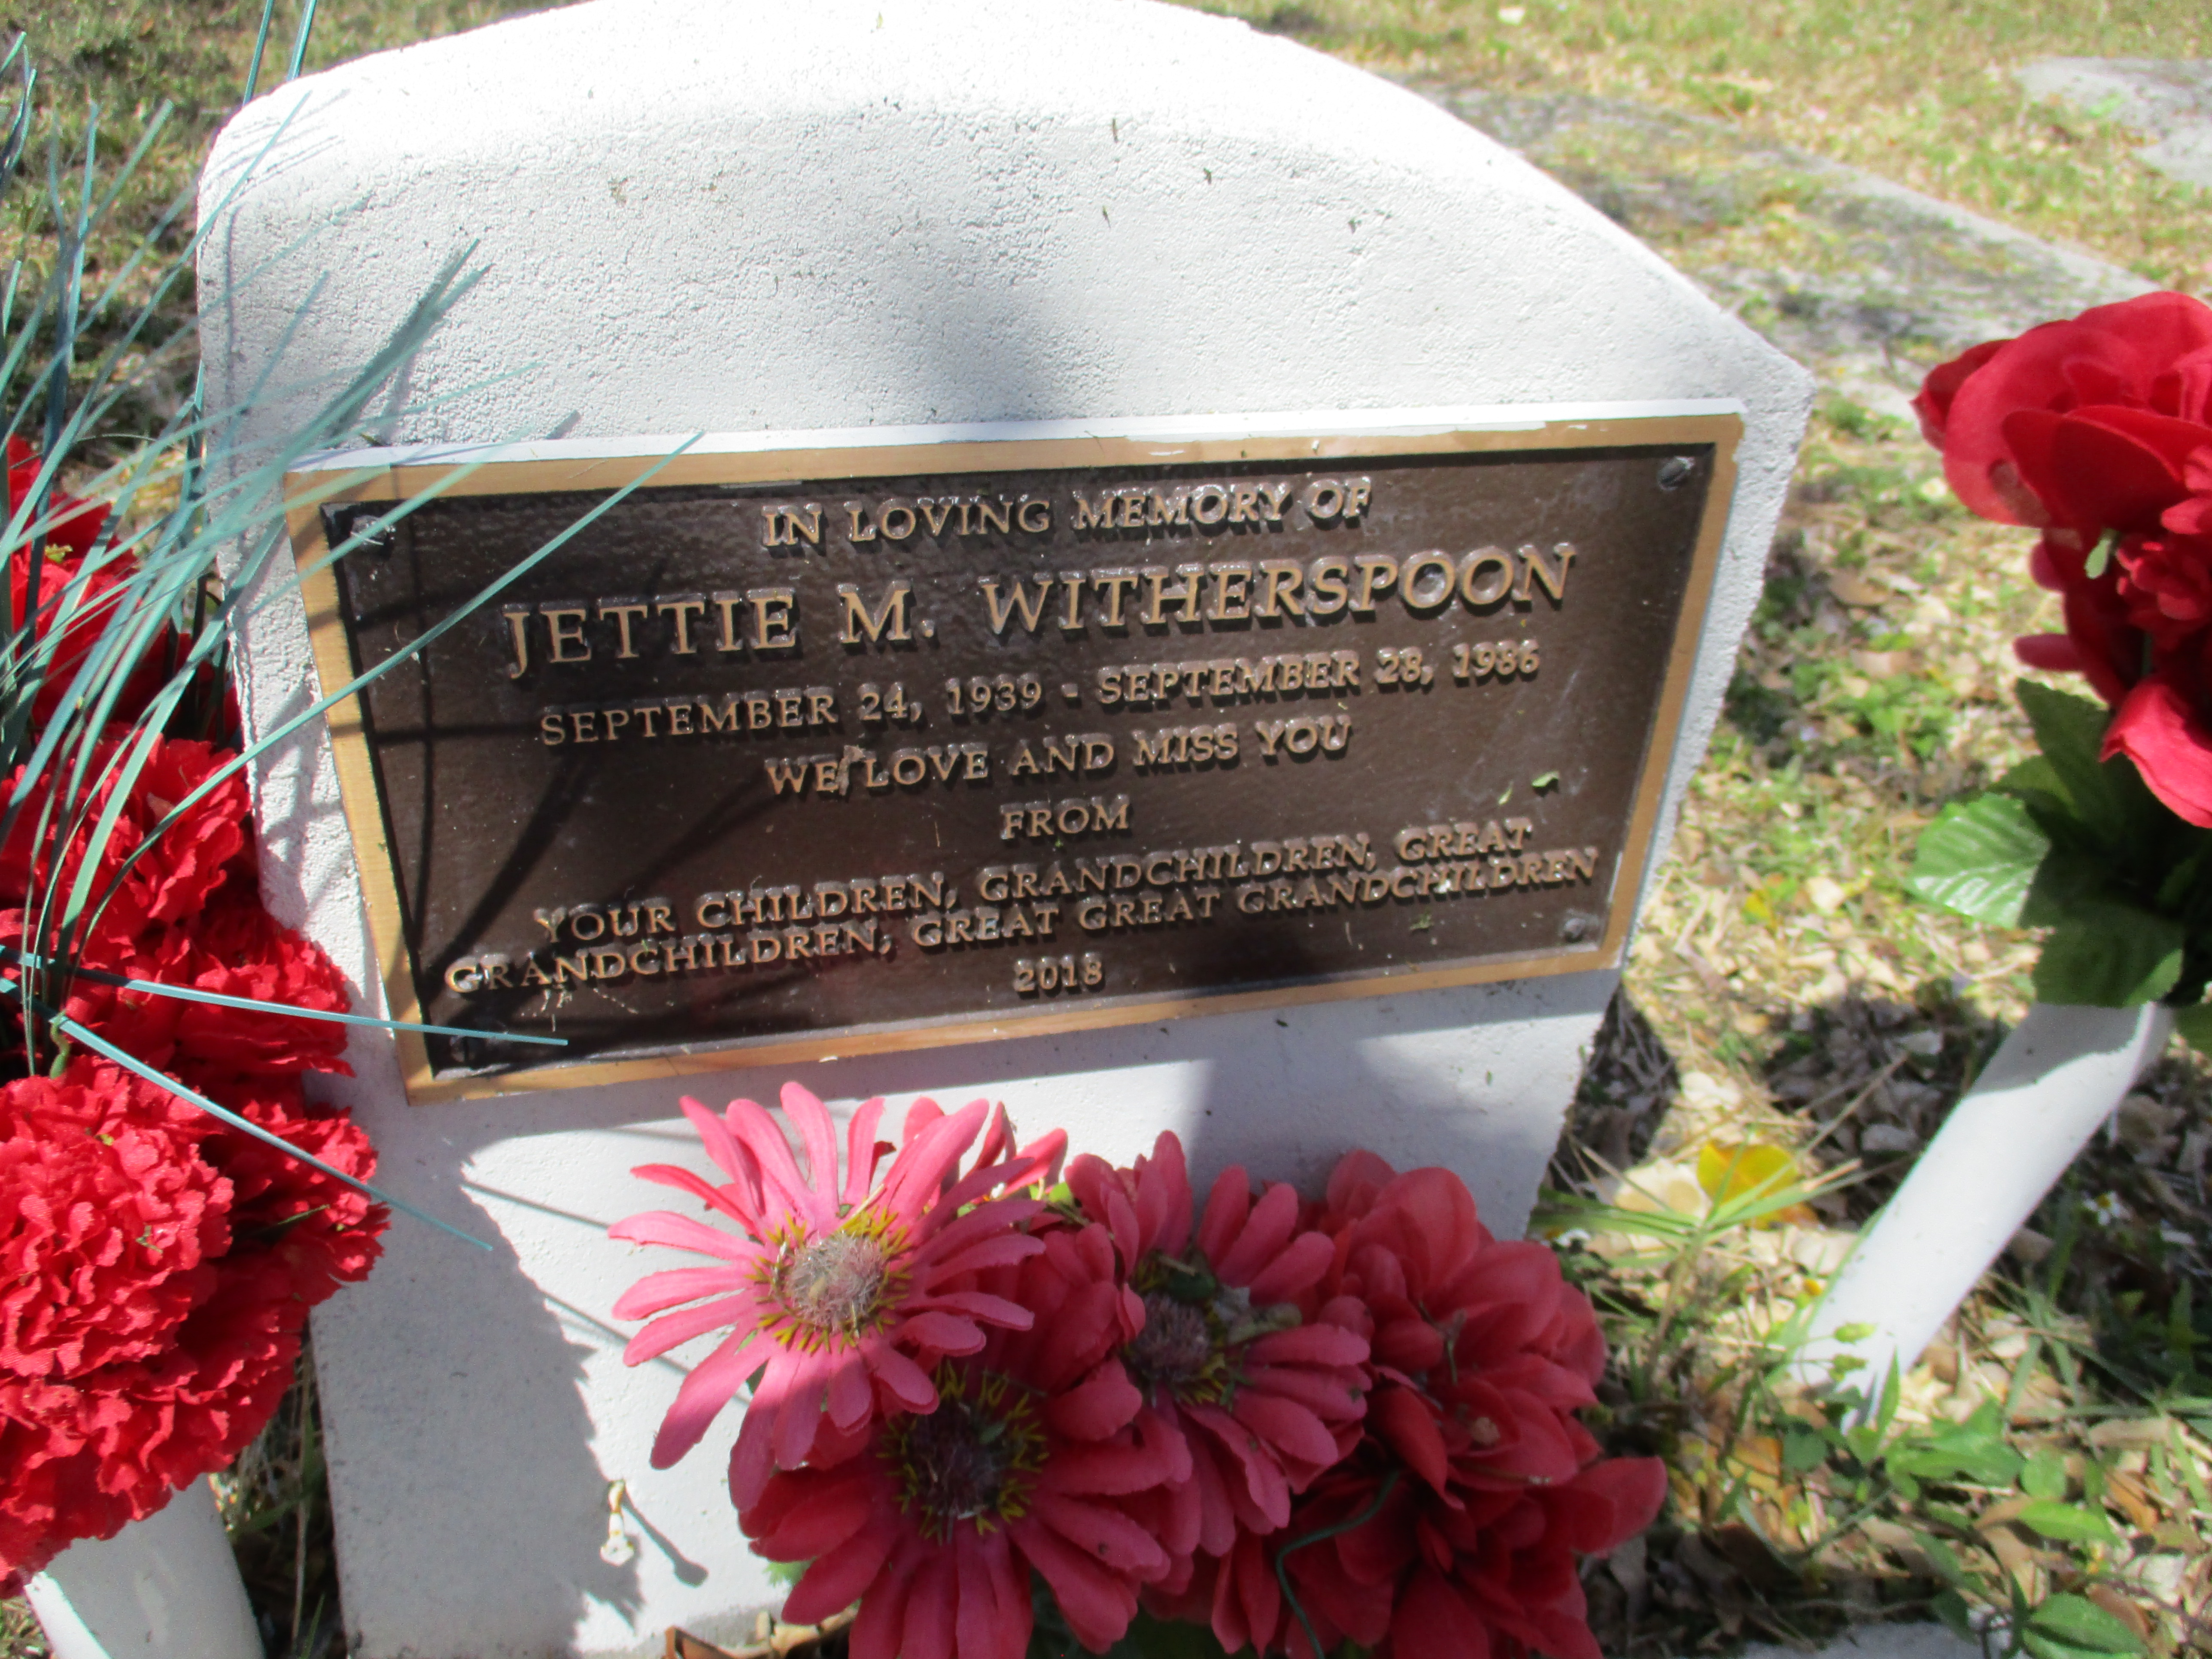 Jettie Mae Witherspoon